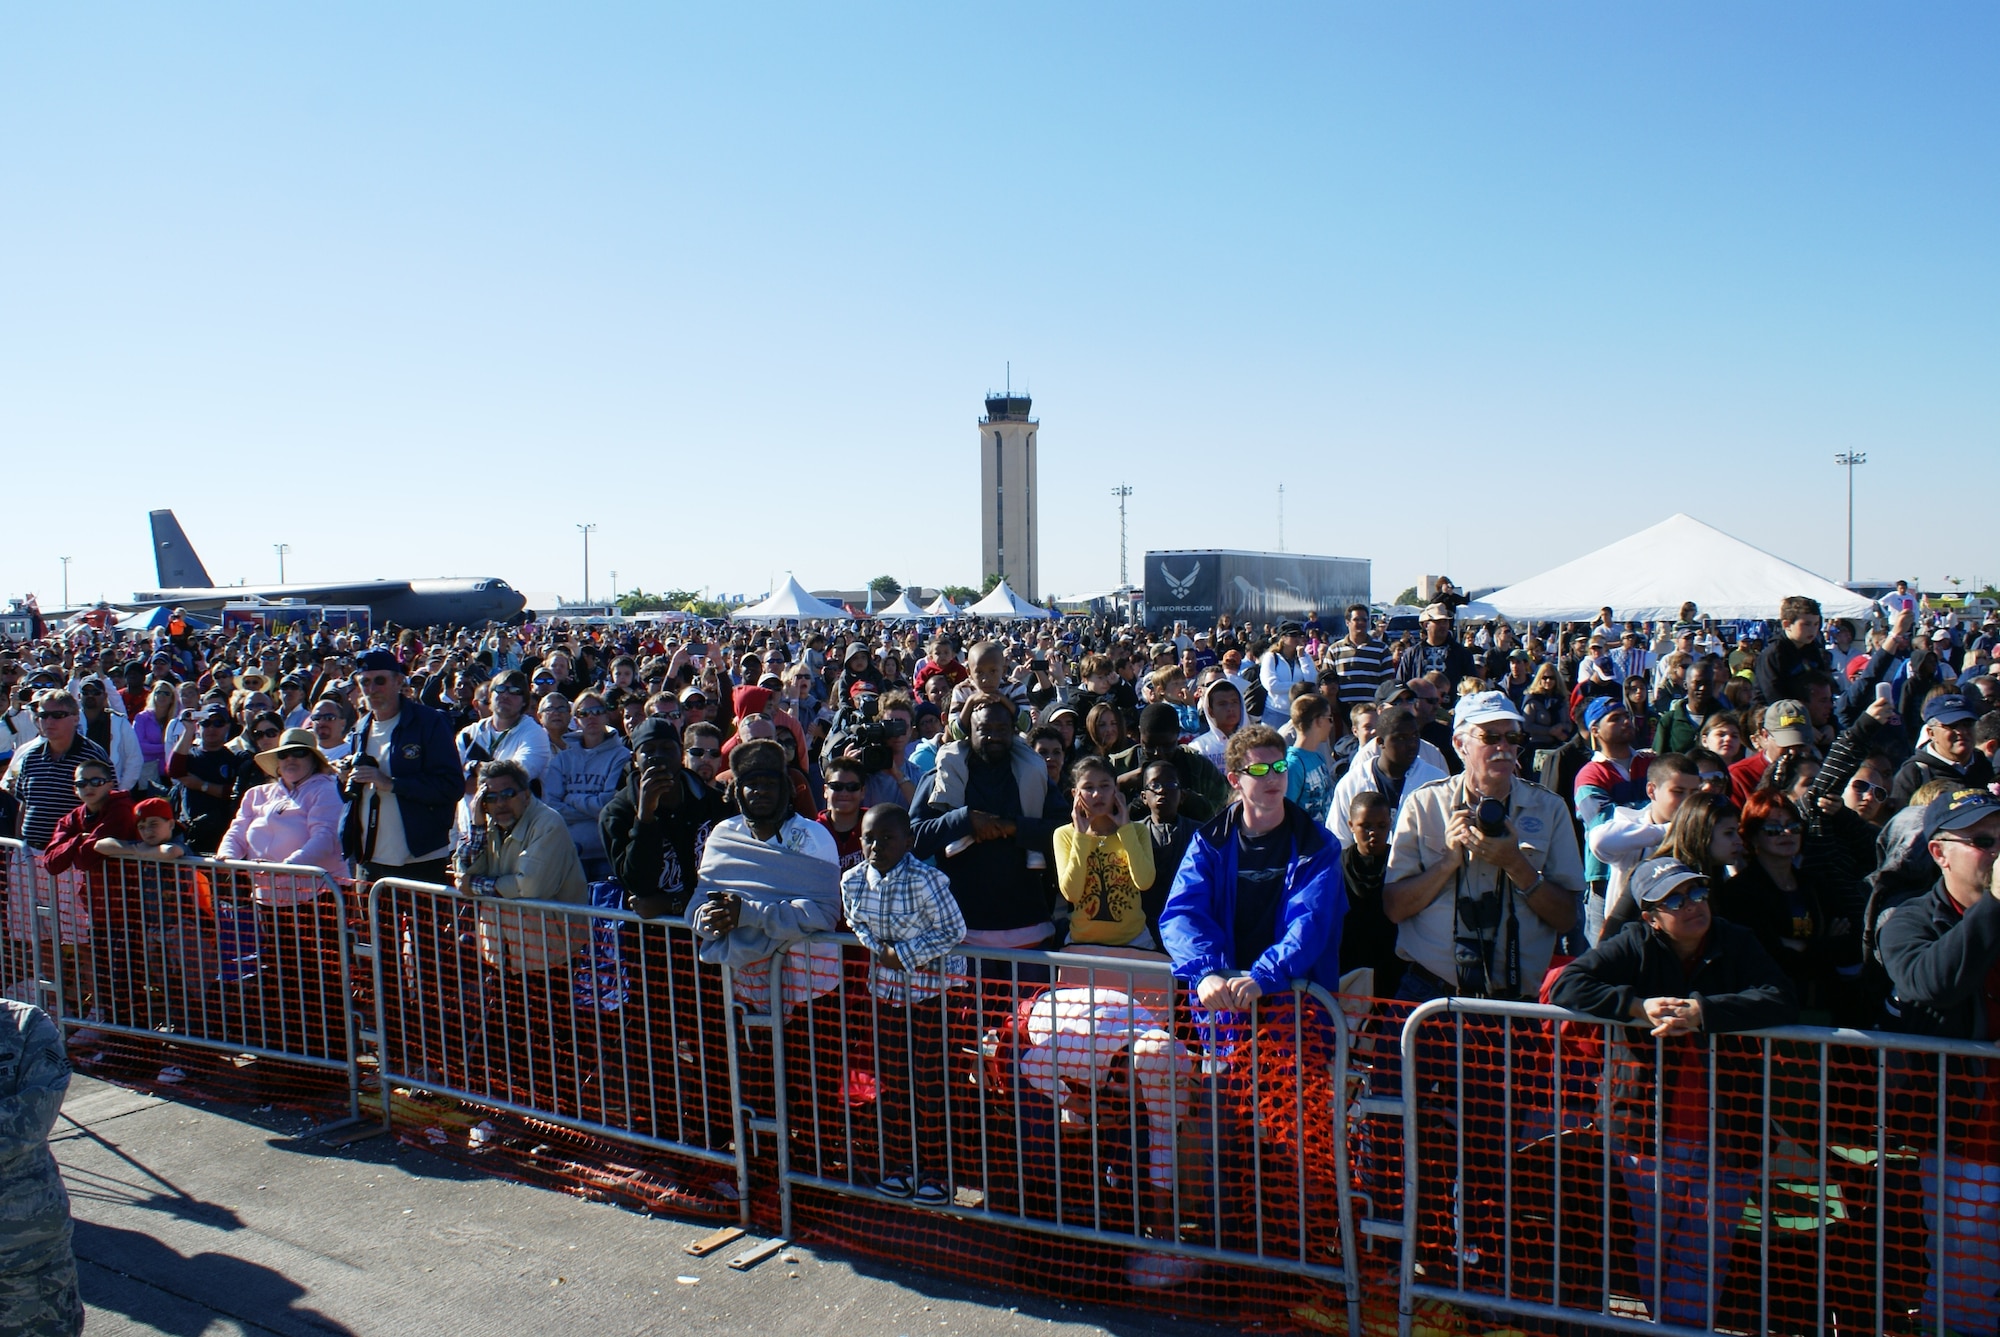 Spectators during Homestead Air Reserve Base's 2010 air show, Wings Over Homestead. (U.S. Air Force photo/Staff Sgt. Lou Burton)